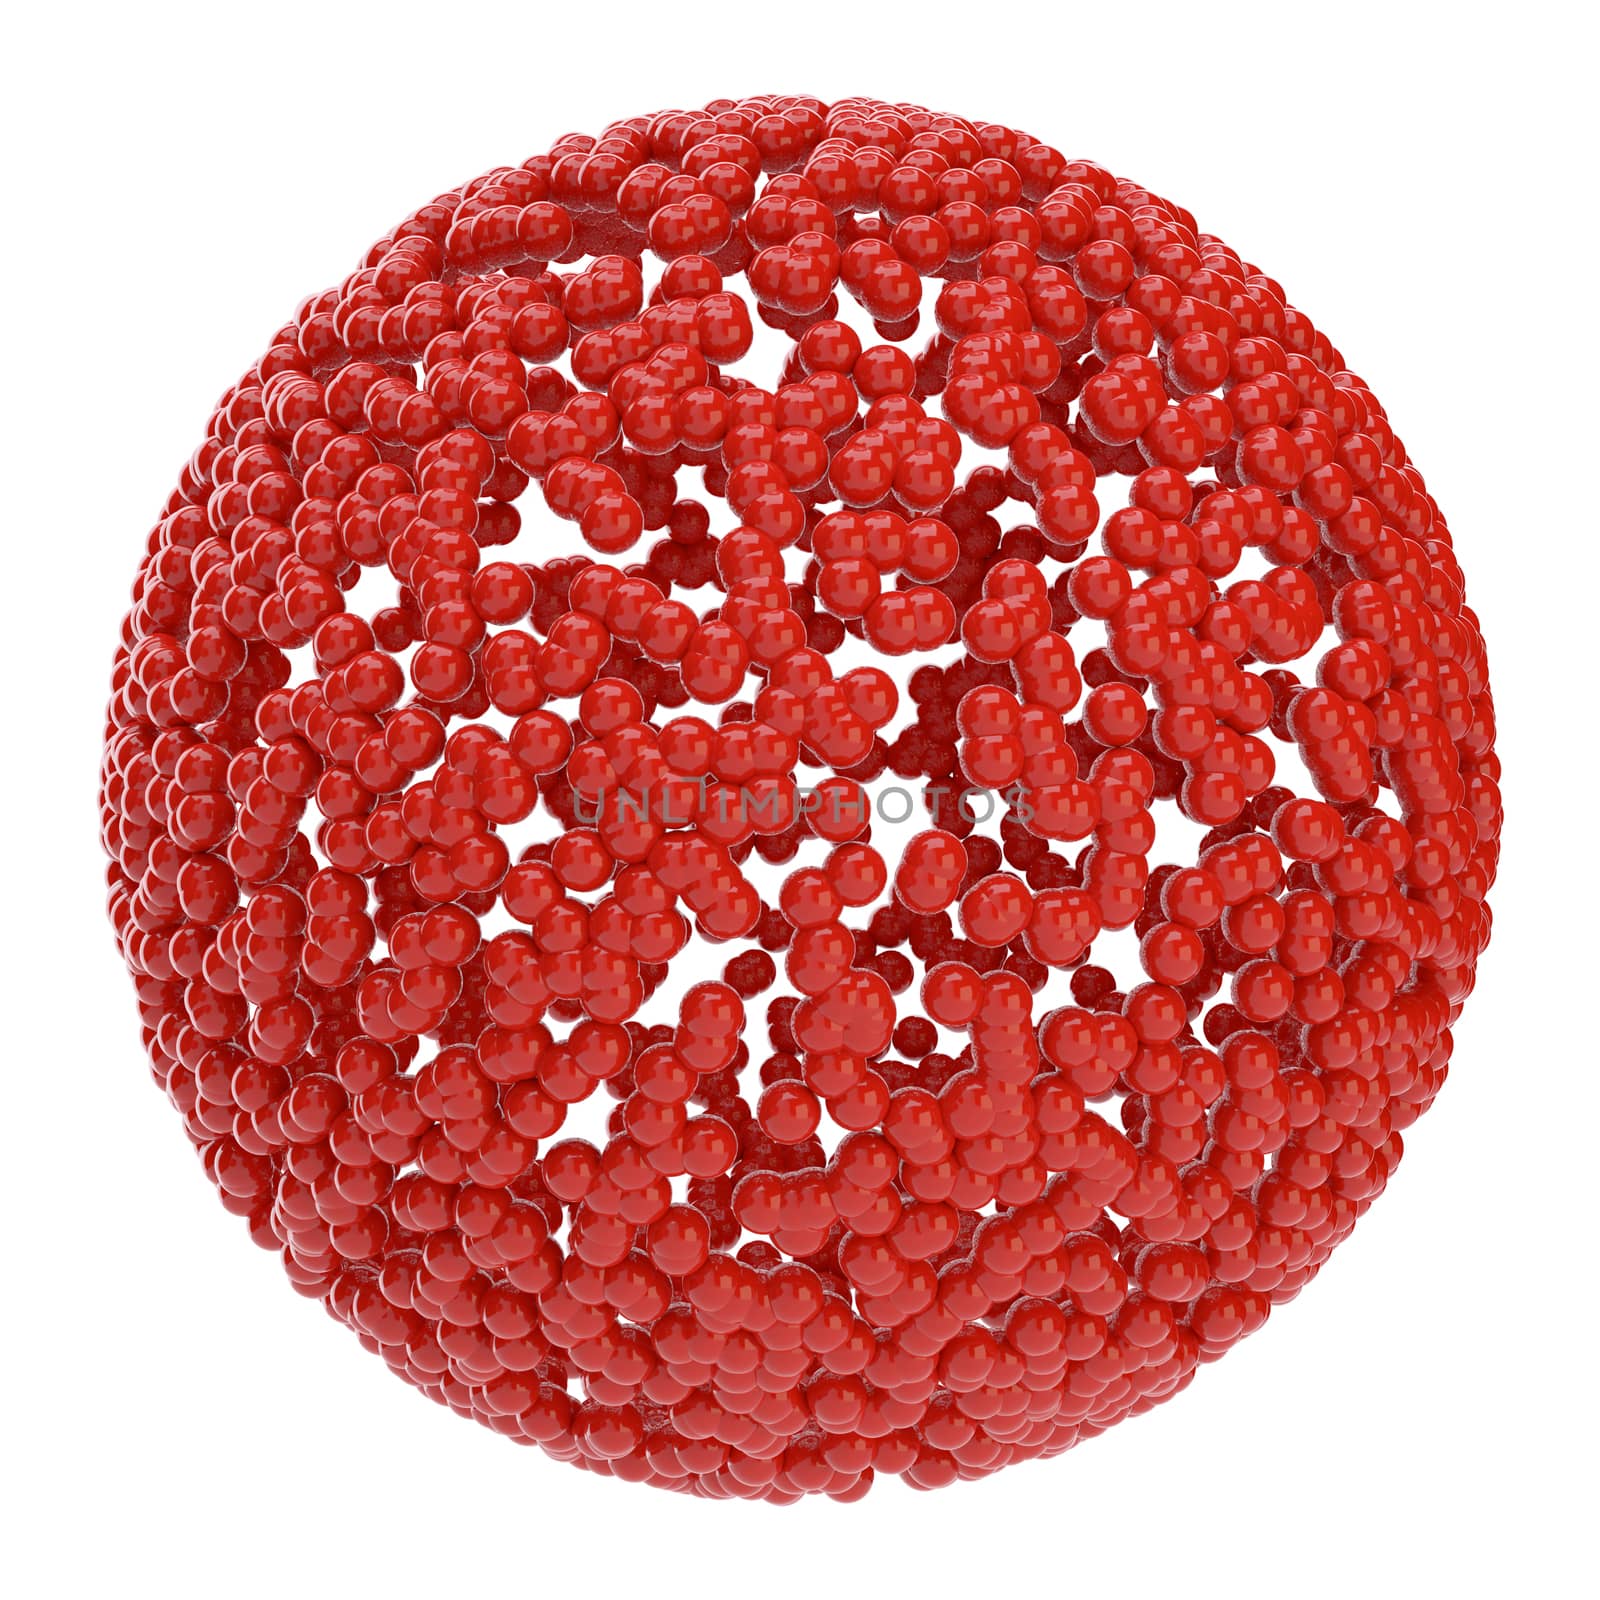 Red abstract sphere consisting of small particles by cherezoff